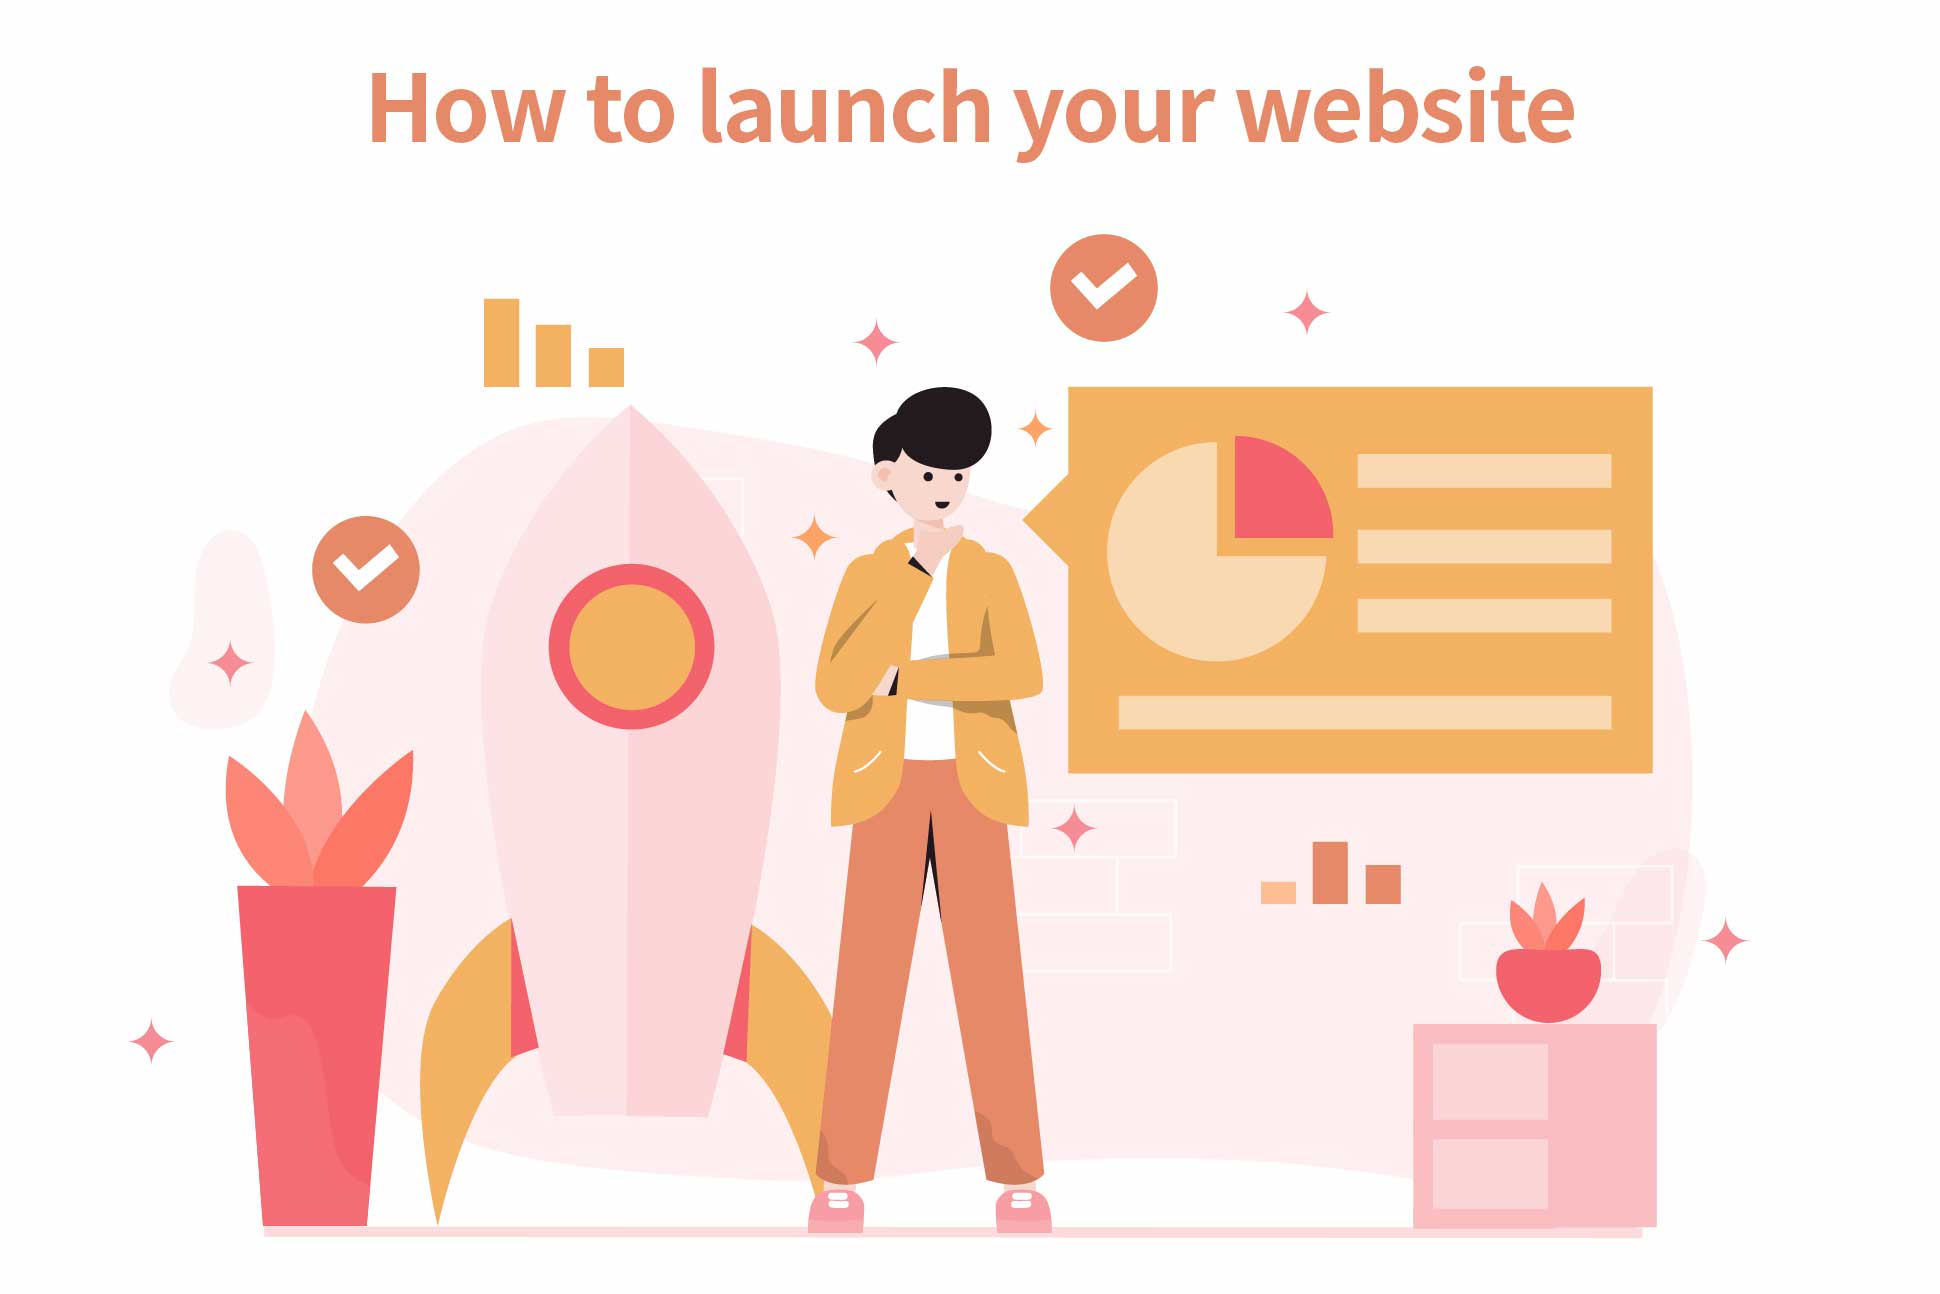 How to launch your website